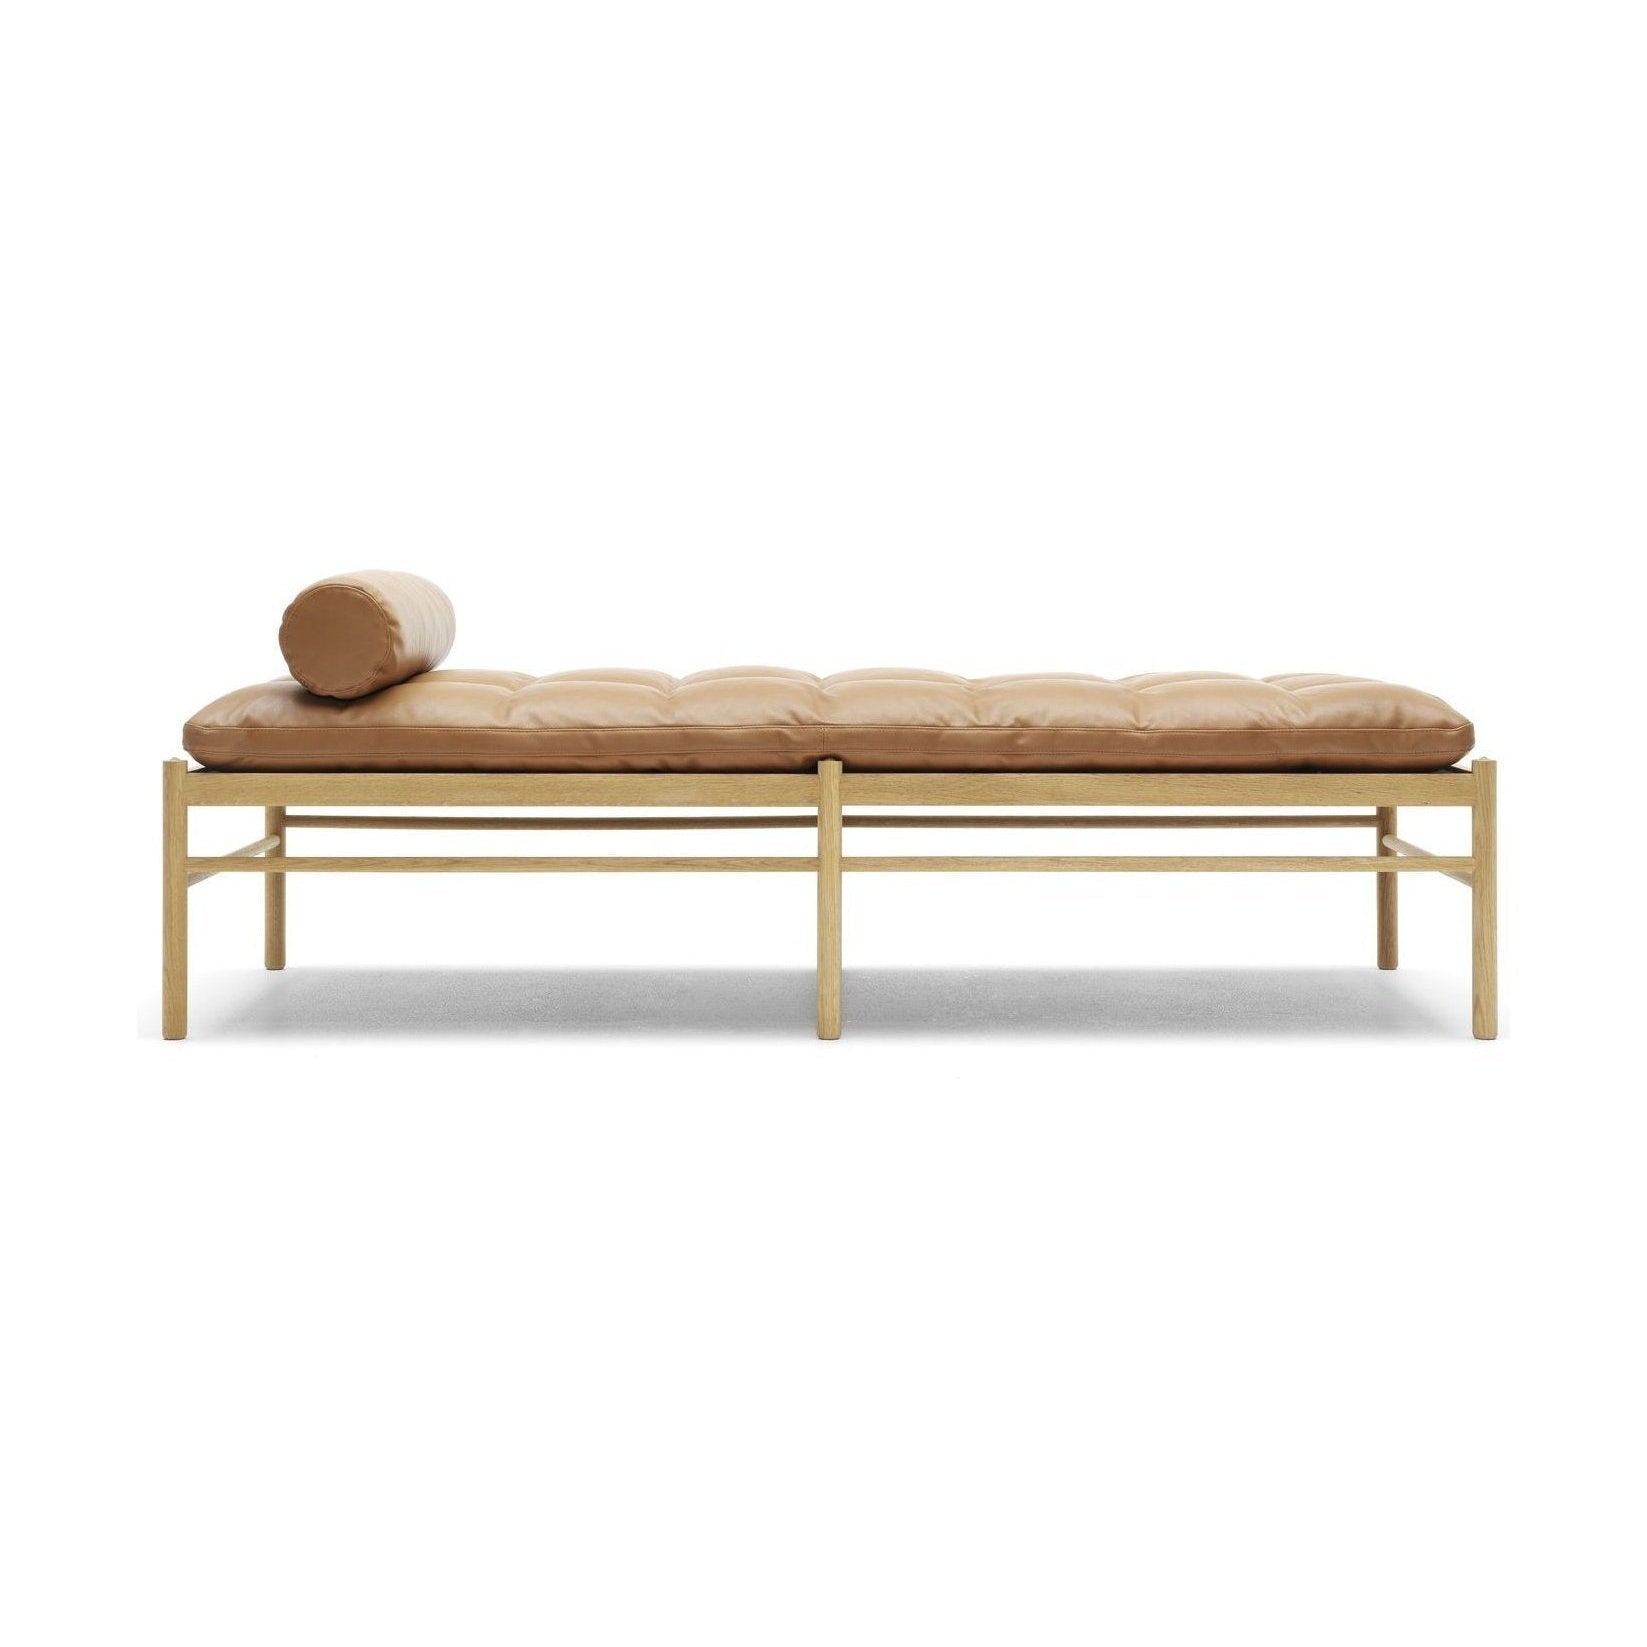 Carl Hansen Ow150 Daybed With Neck Pillow, Oiled Oak/Golden Brown Leather